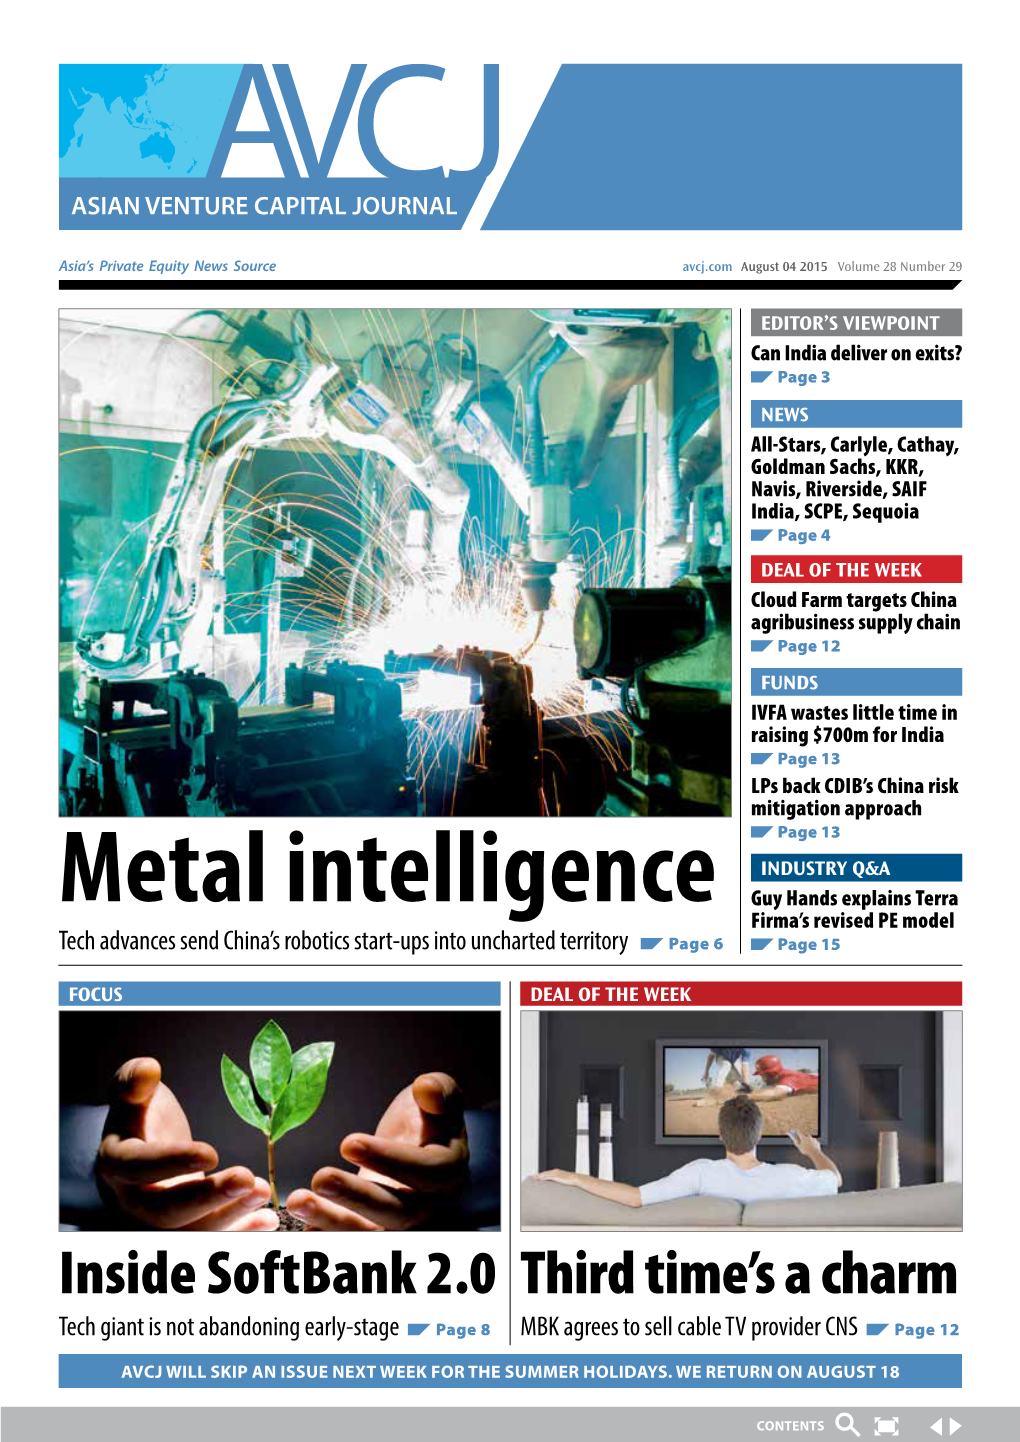 Metal Intelligence Guy Hands Explains Terra Firma’S Revised PE Model Tech Advances Send China’S Robotics Start-Ups Into Uncharted Territory Page 6 Page 15